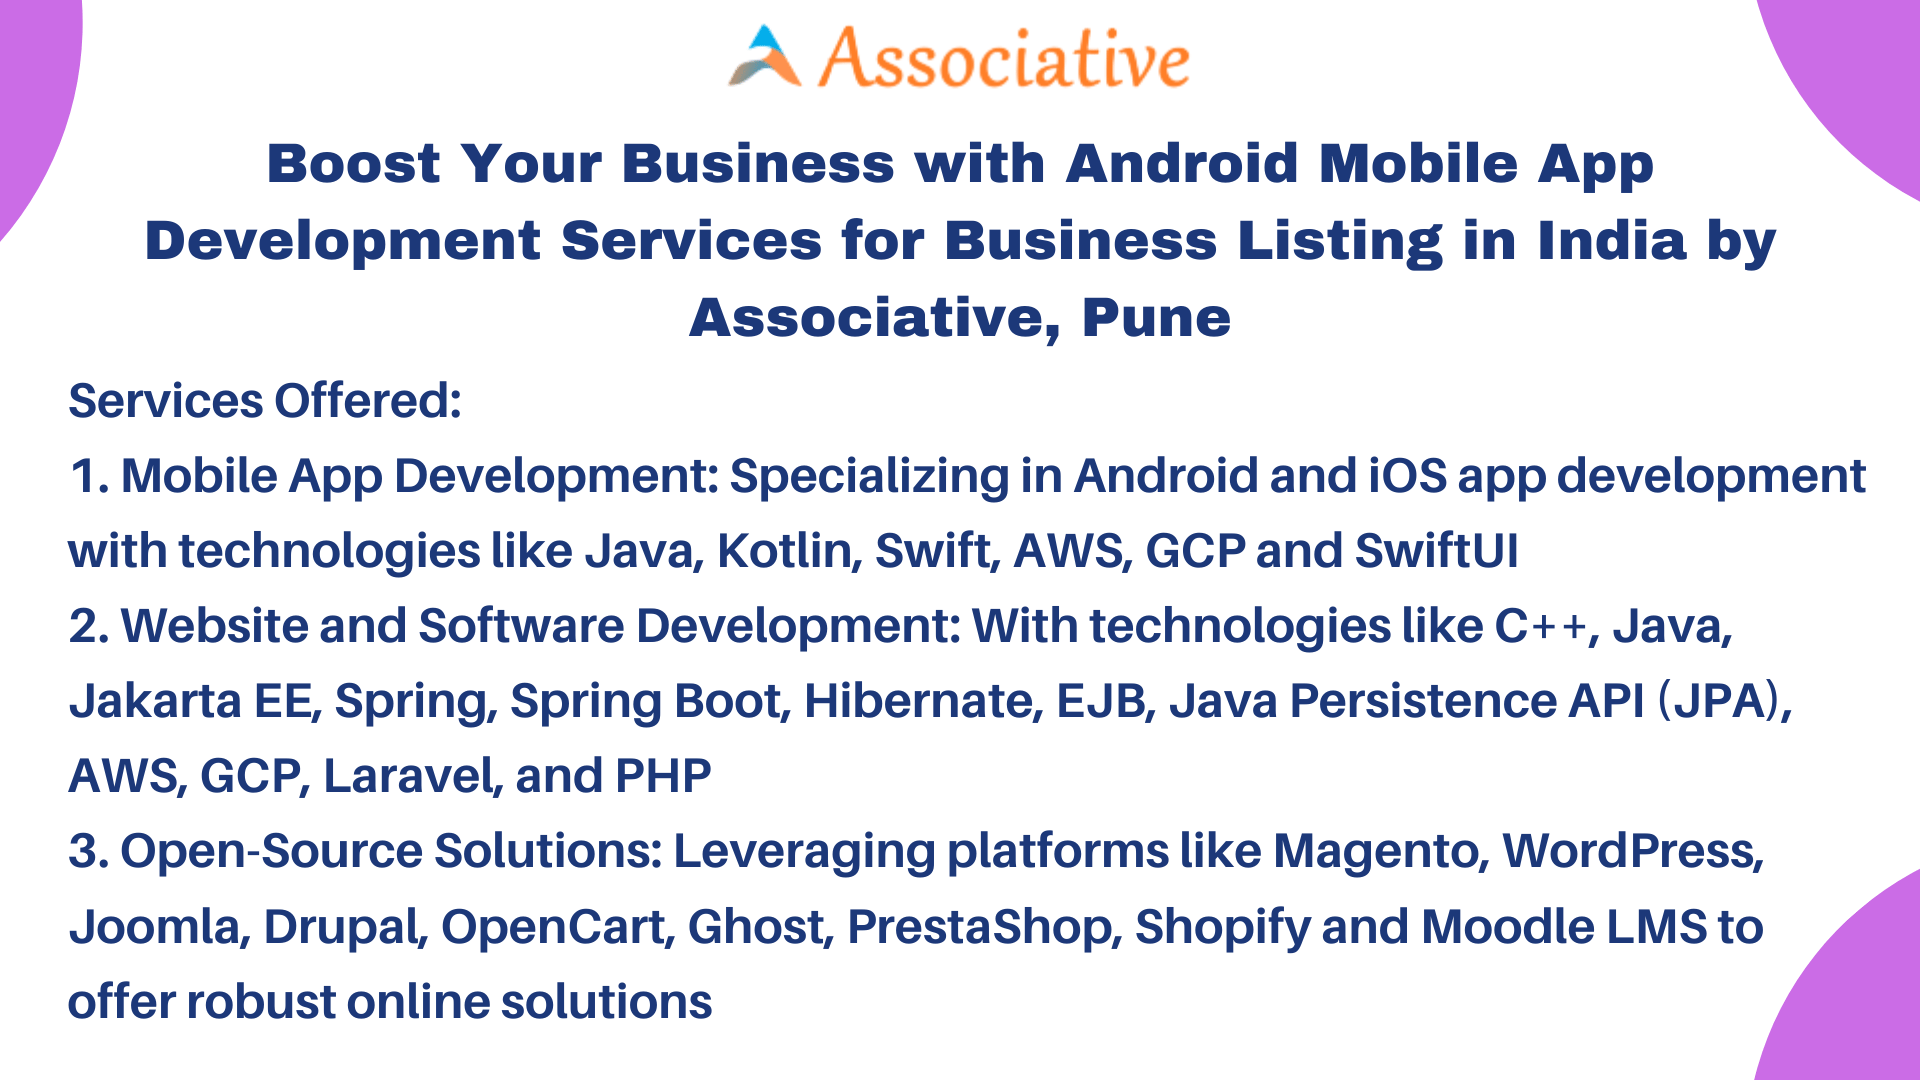 Boost Your Business with Android Mobile App Development Services for Business Listing in India by Associative, Pune